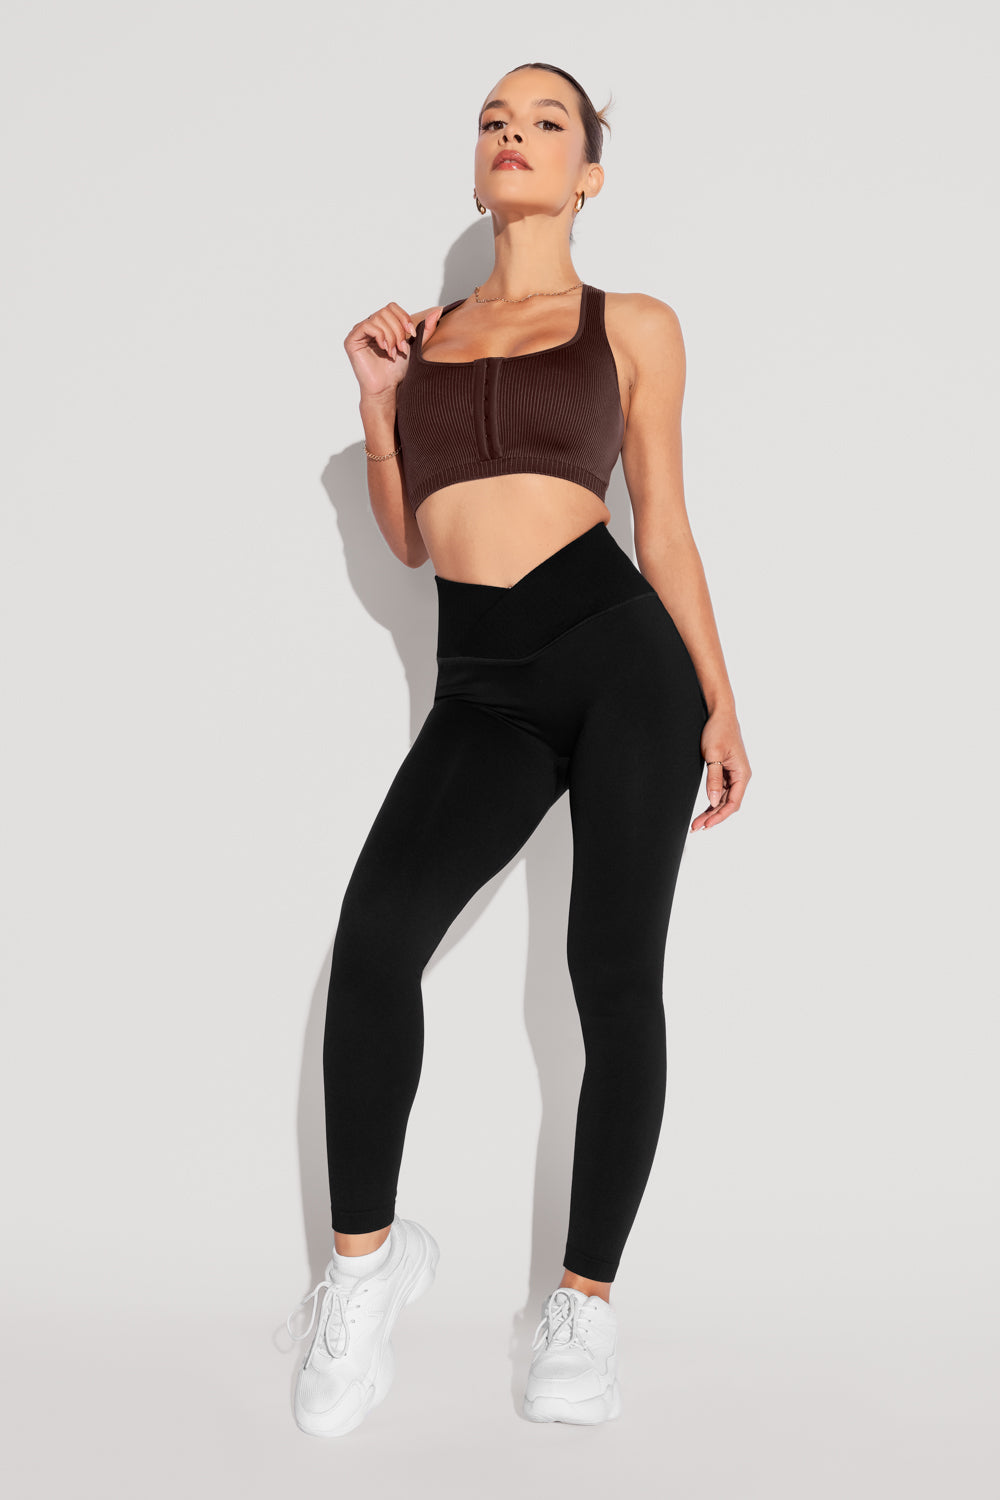 Women Pants Wholesale Black Grommet Side Sexy Women Leggings Autumn and  Winter Thin Velvet Windproof Slimming Fitness Jogging Leggings - China  Women Leggings and Women Pants Wholesale Black price | Made-in-China.com